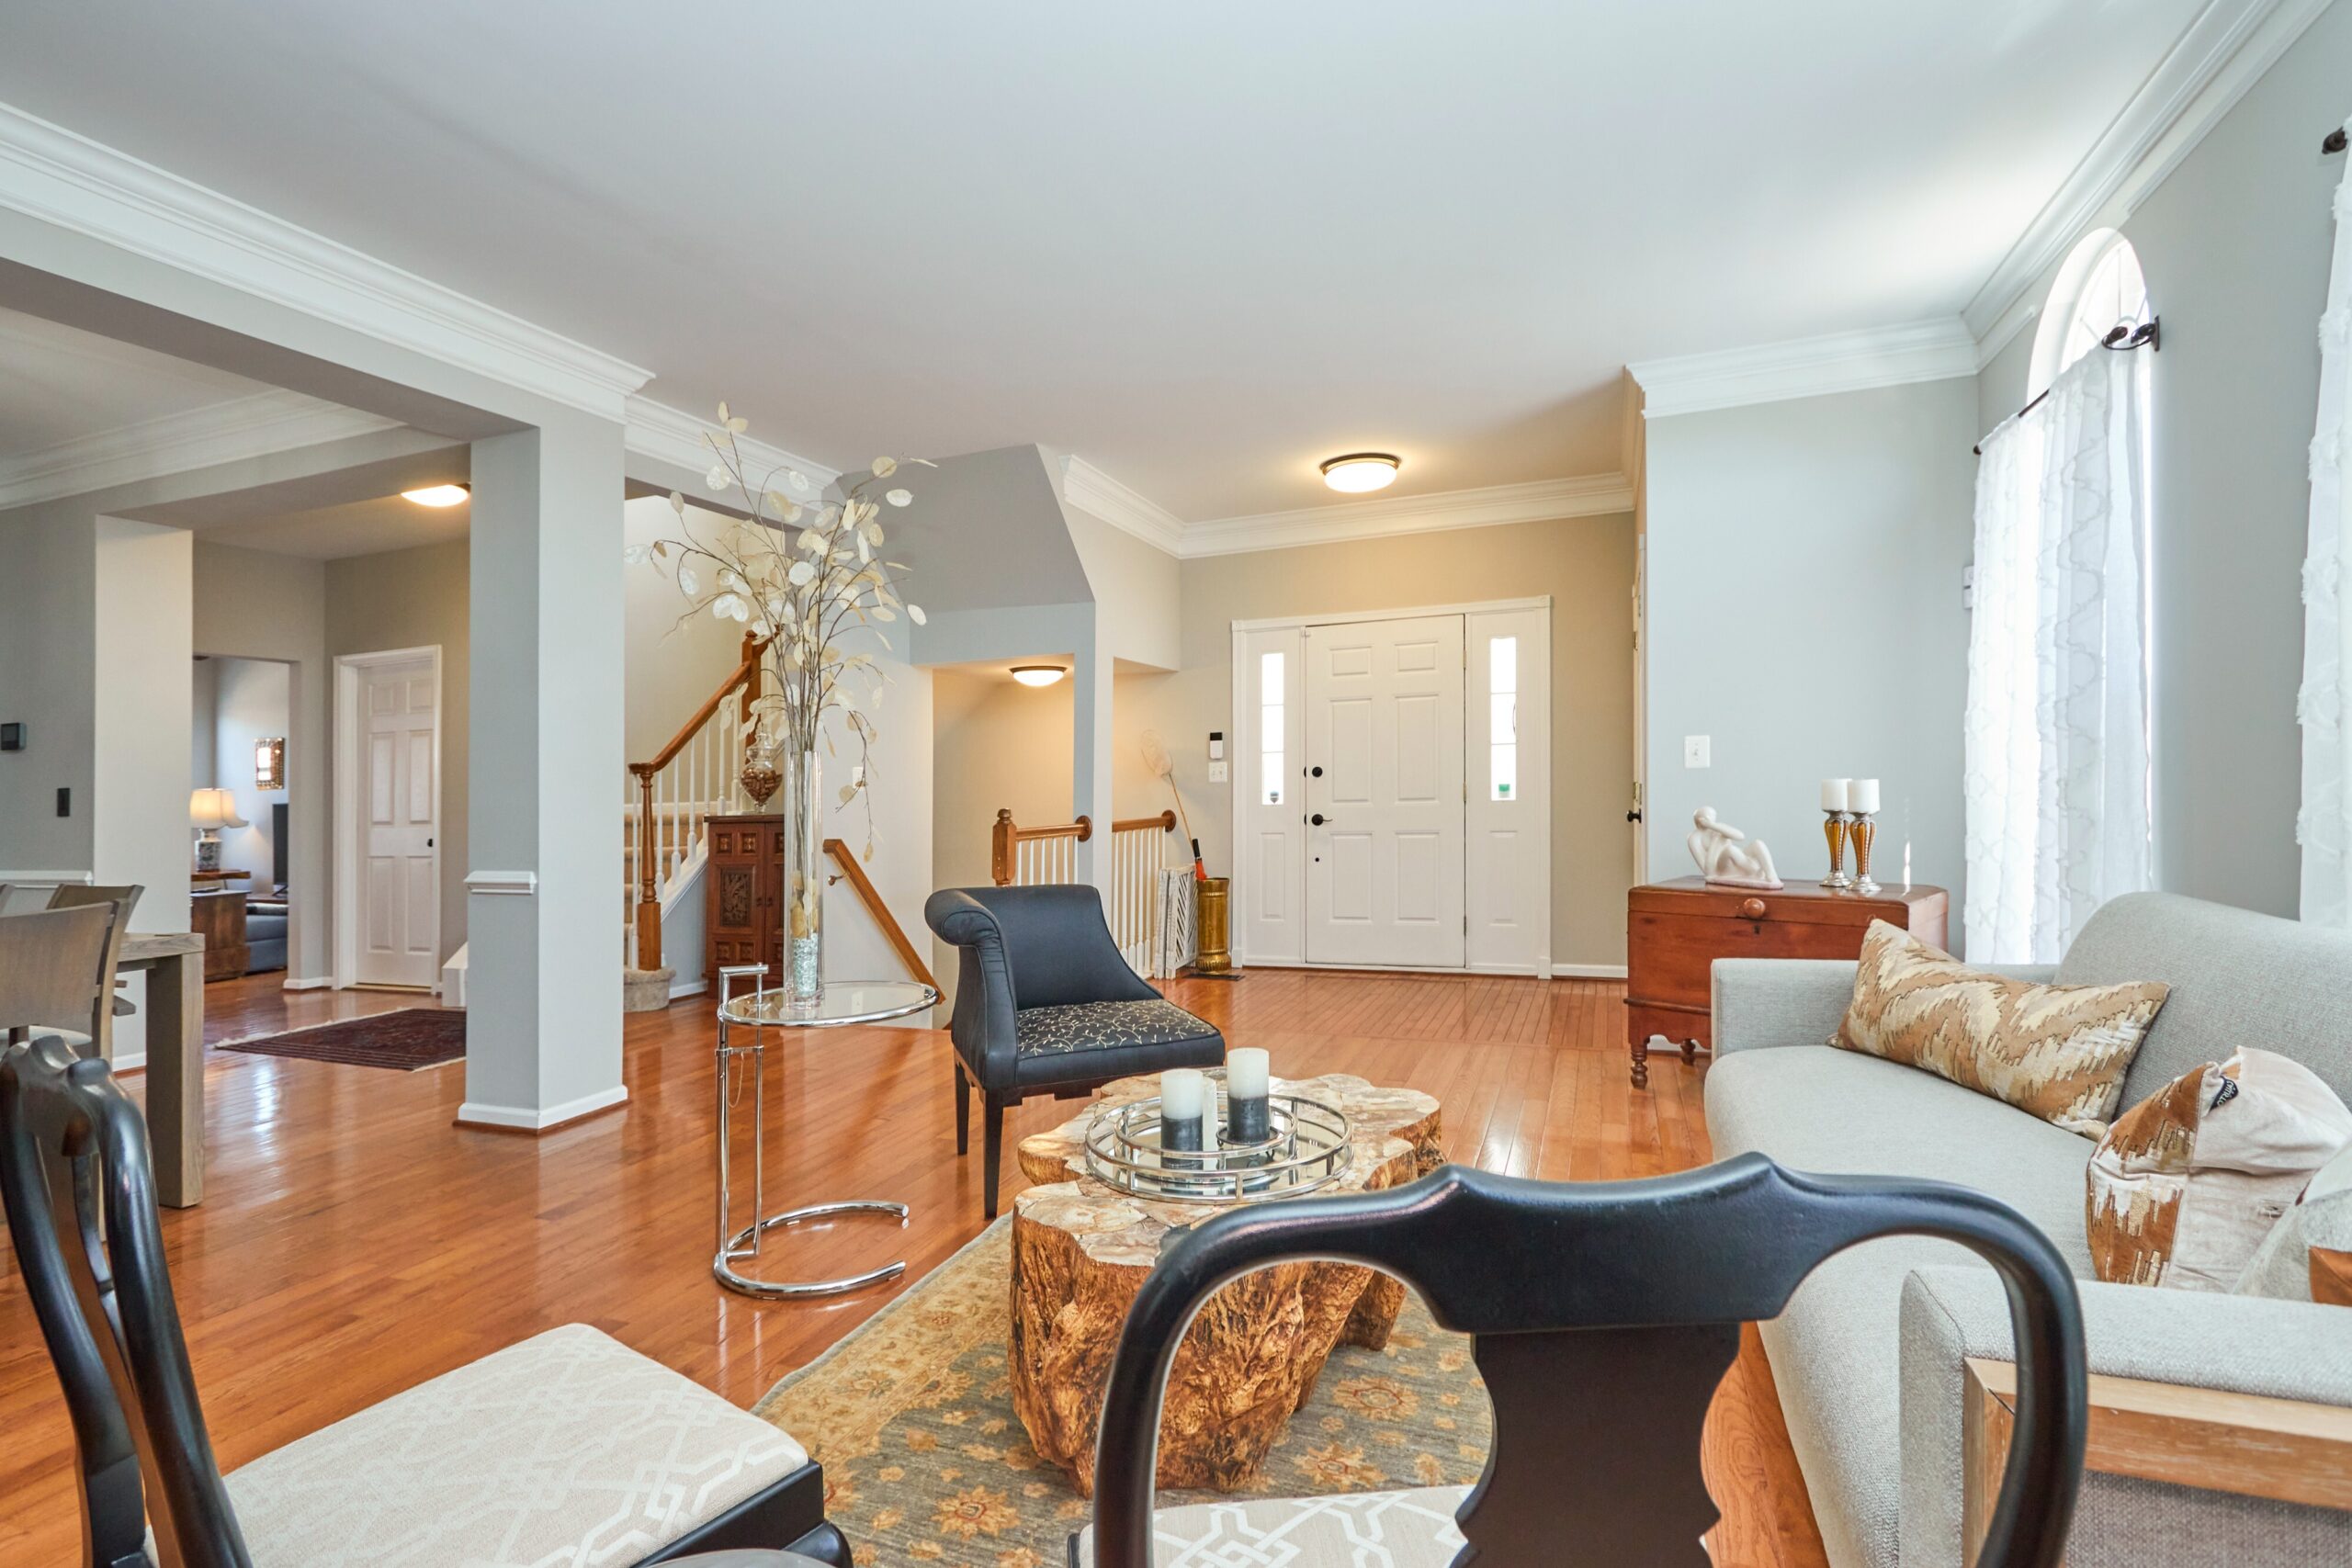 Professional interior photo of 25499 Beresford Drive, Chantilly, Virginia - showing the living room on the main level with hardwood floors